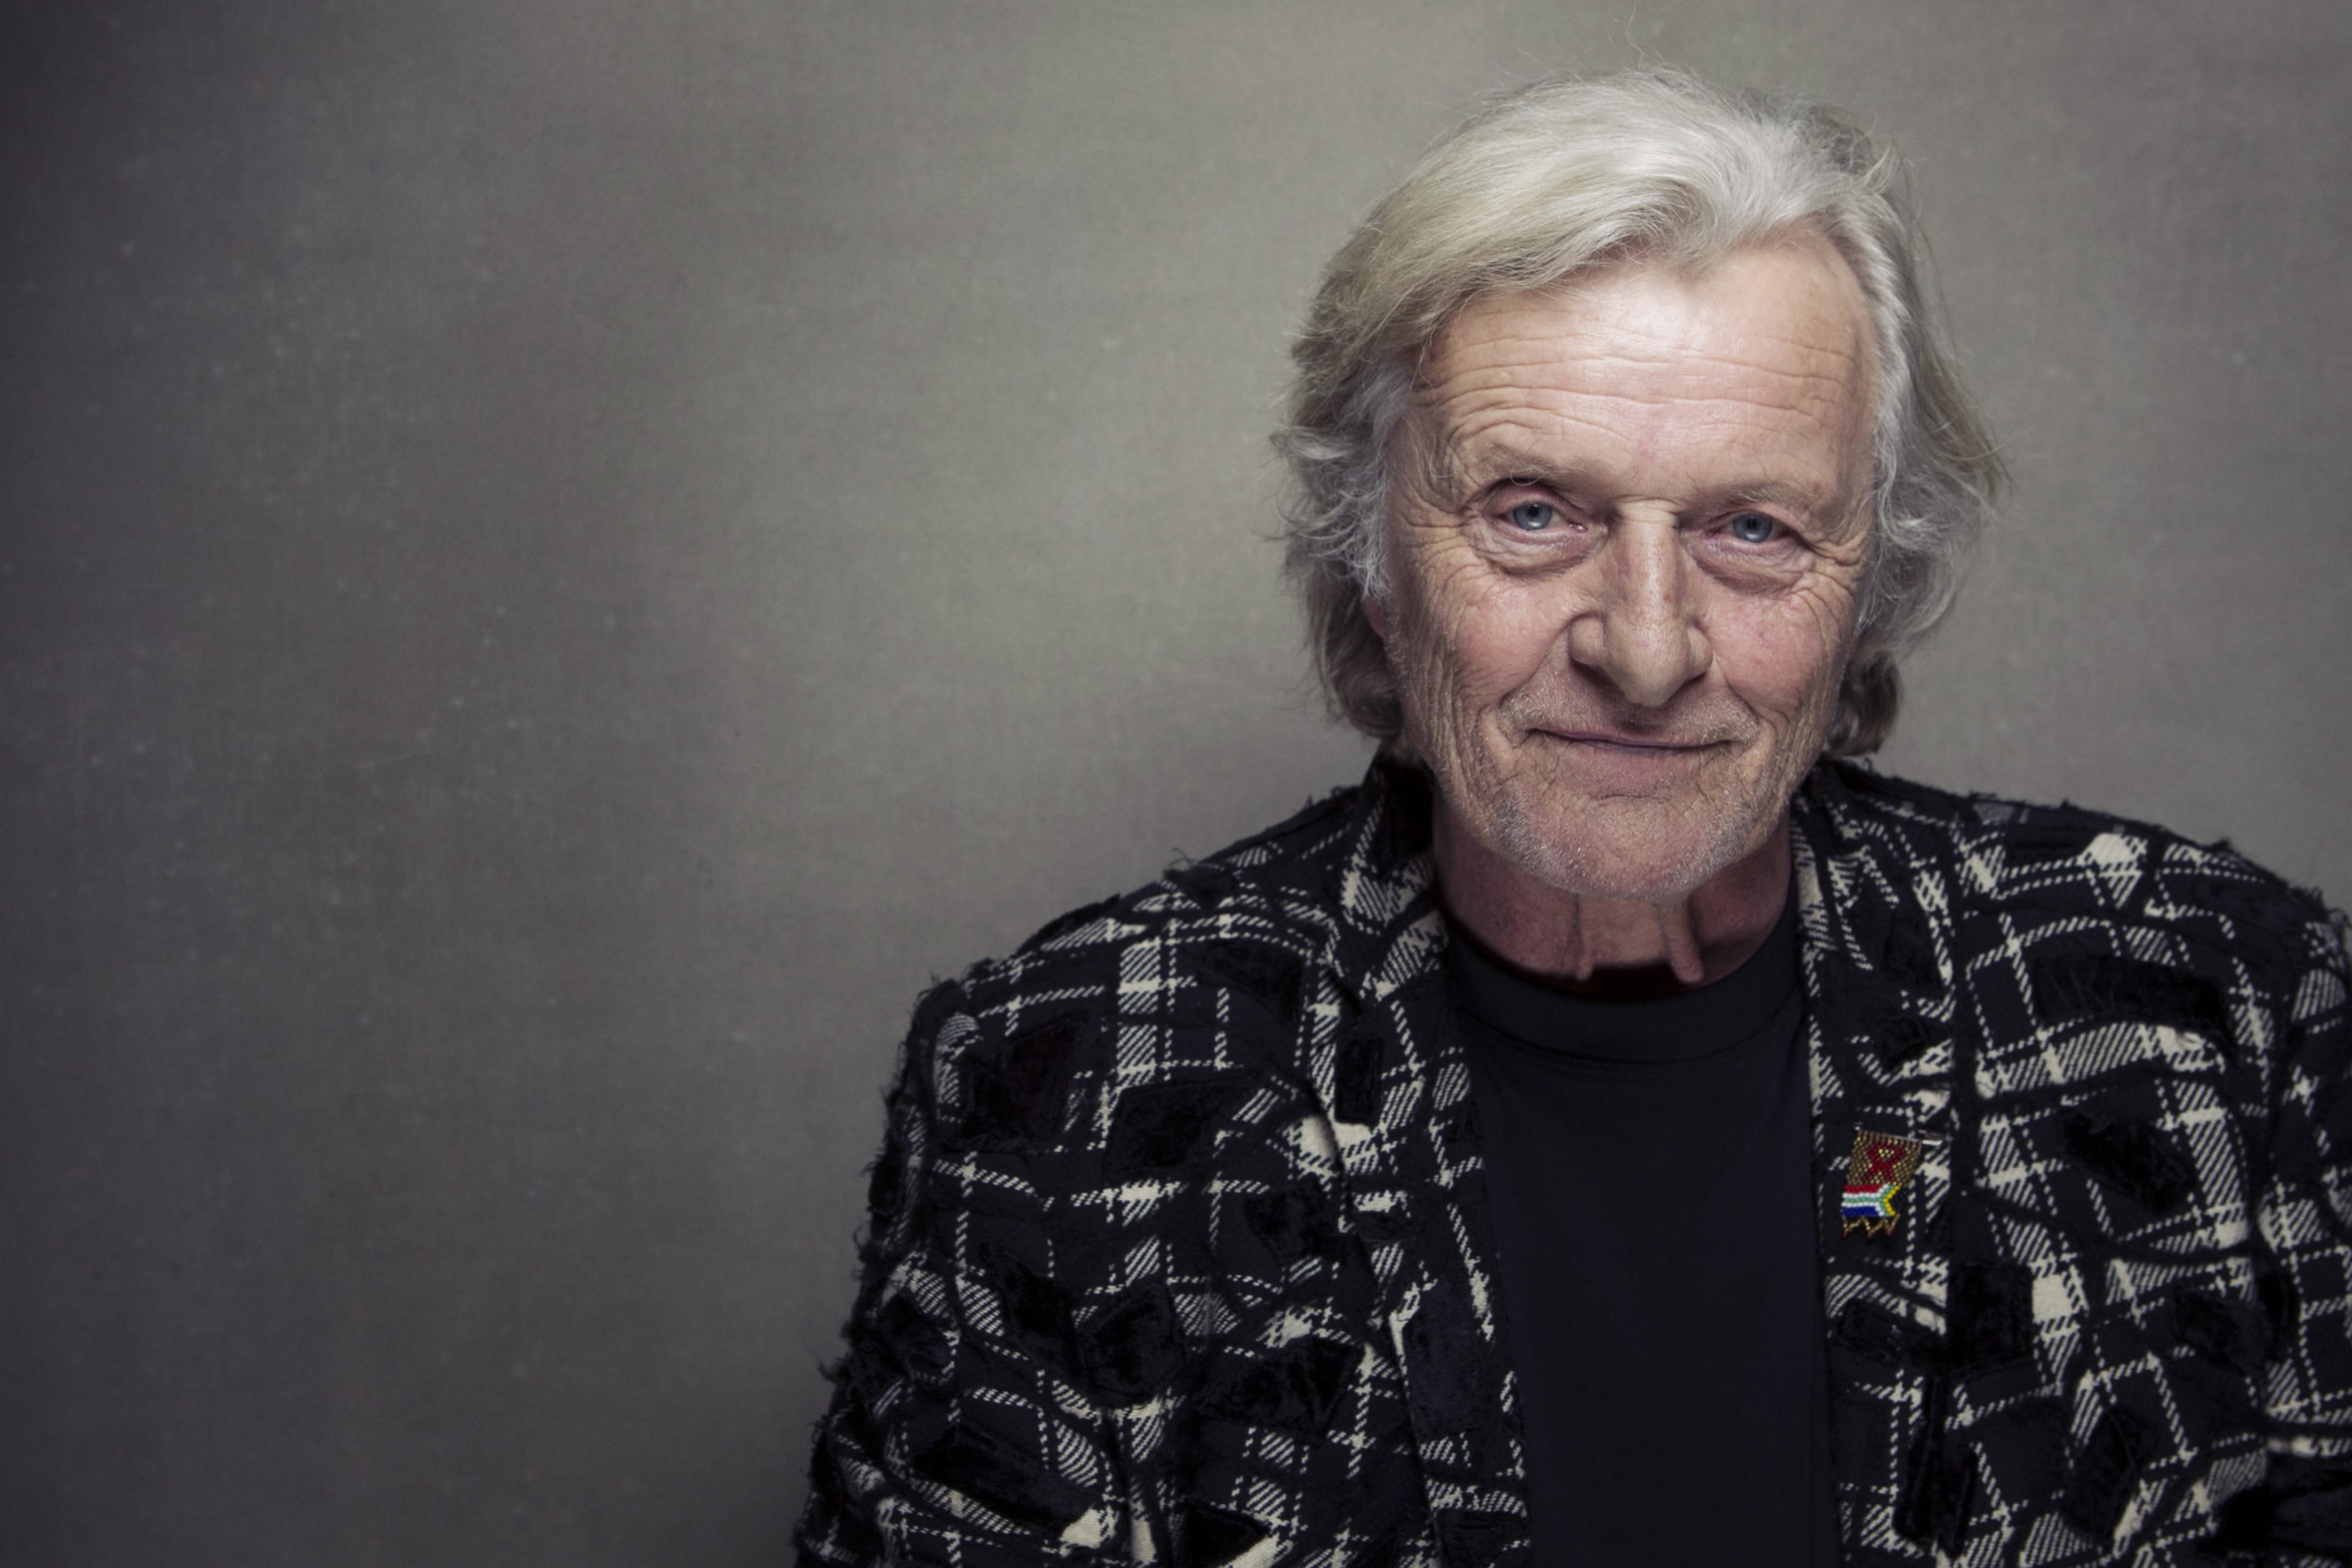 FILE - This Jan. 19, 2013 file photo shows actor Rutger Hauer at the Sundance Film Festival in Park City, Utah. Hauer, who specialized in menacing roles, including a memorable turn as a murderous android in "Blade Runner" opposite Harrison Ford, has died July 19 at his home in the Netherlands. He was 75.